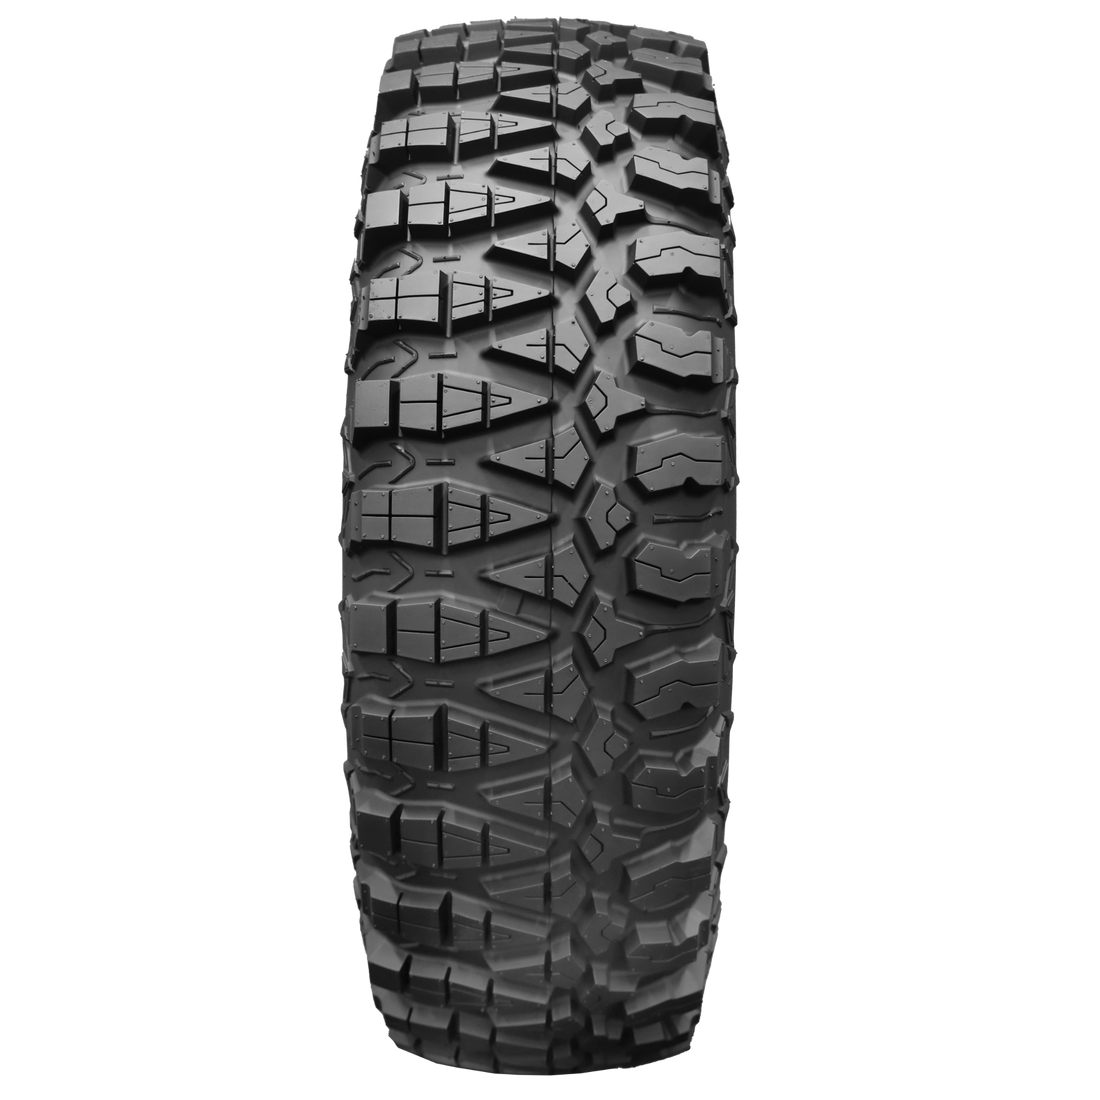 Full frontal view of Terra Master SQ UTV tire, highlighting its two distinct tread patterns. The tire offers the flexibility to alternate sides for improved traction in either hard or soft-to-intermediate terrains, catering to diverse off-road conditions